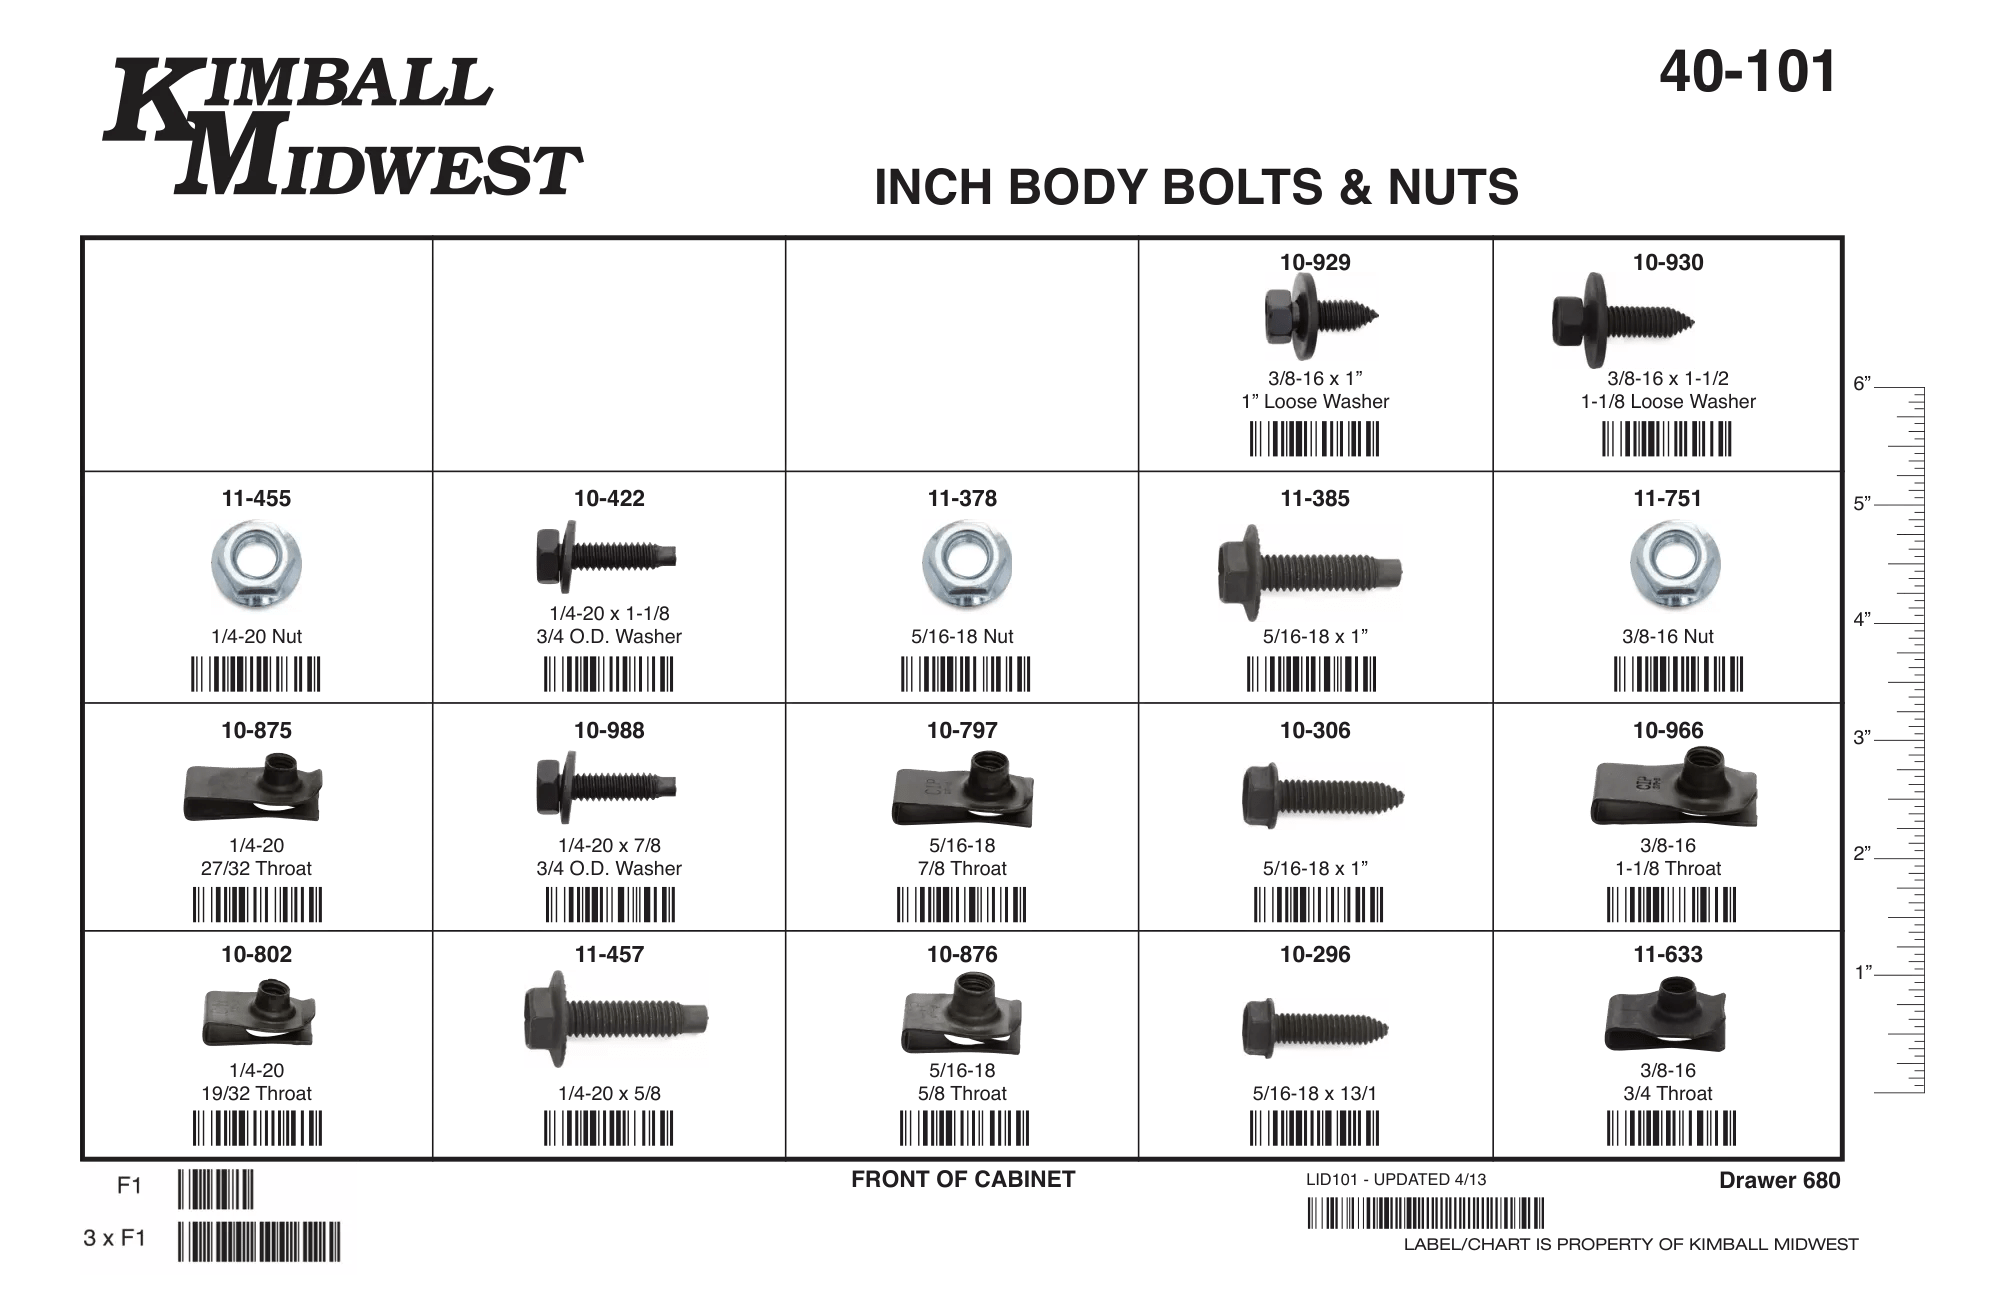 Body Bolts & Nuts - Inch